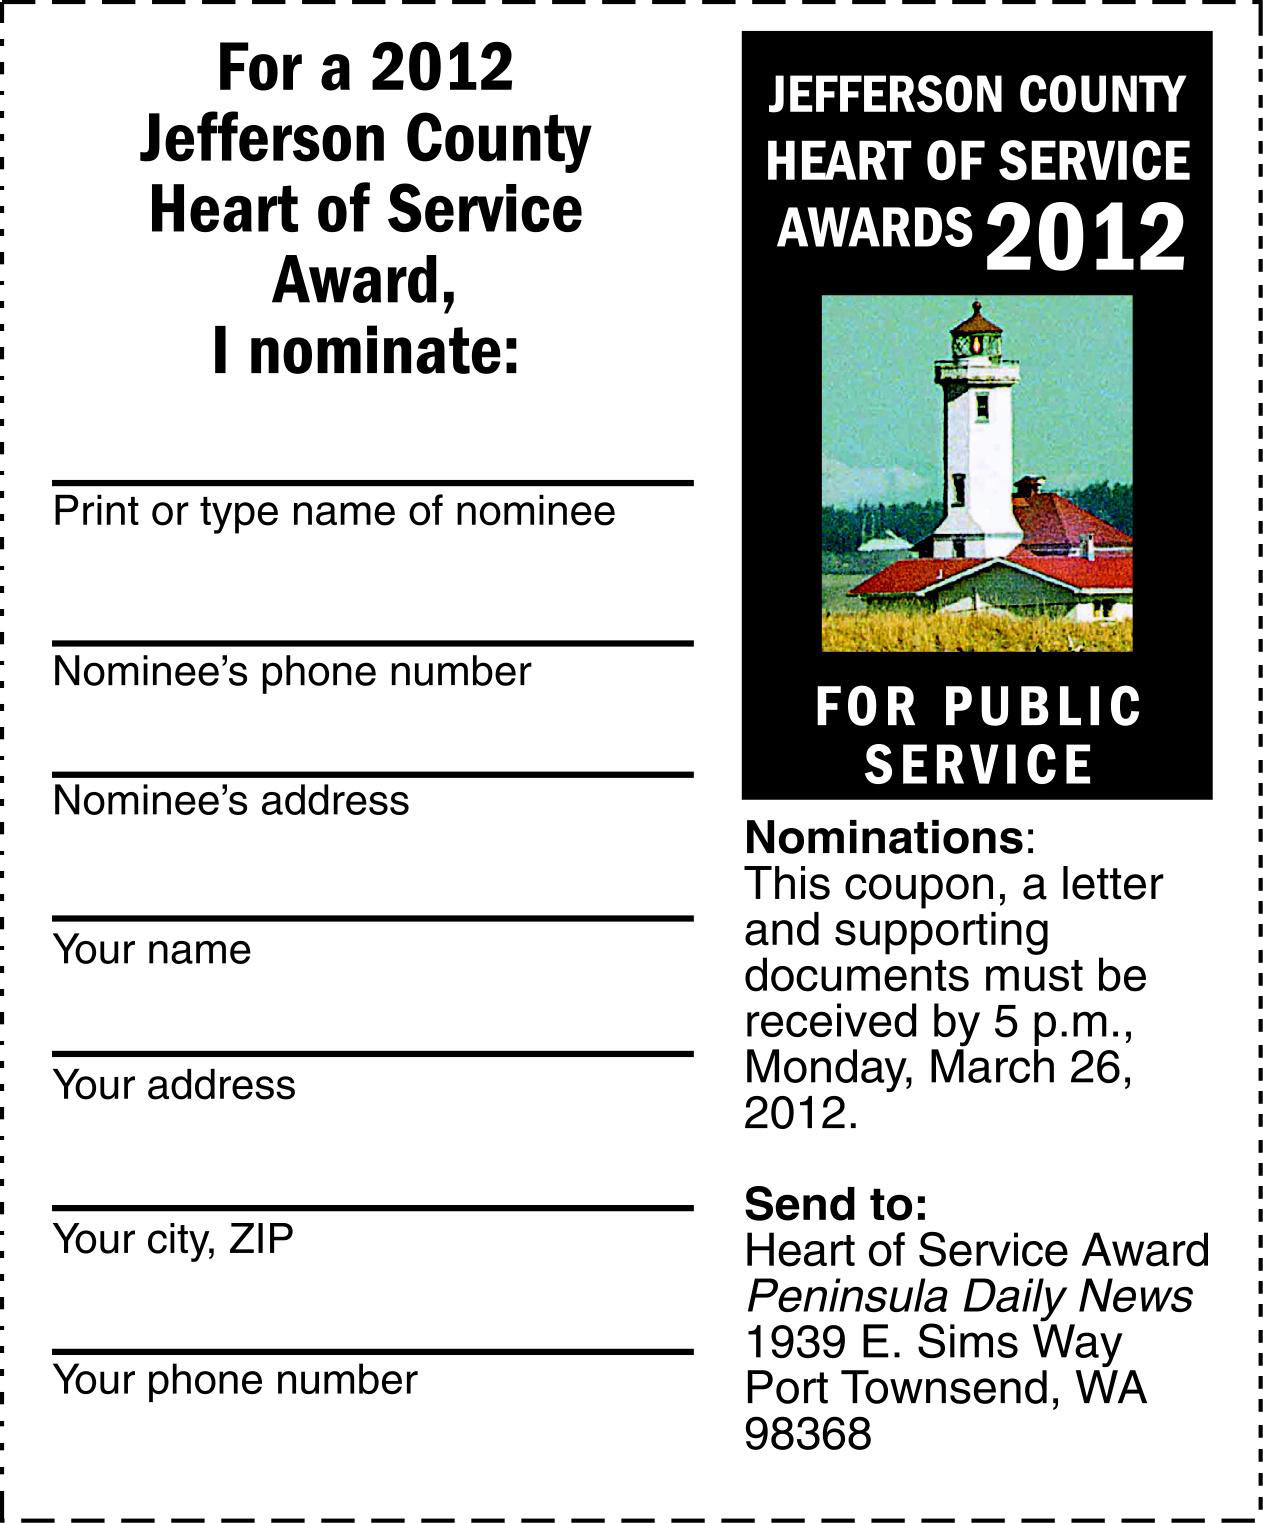 Nominate your community hero for Jefferson County Heart of Service award — DEADLINE MONDAY 5 p.m.